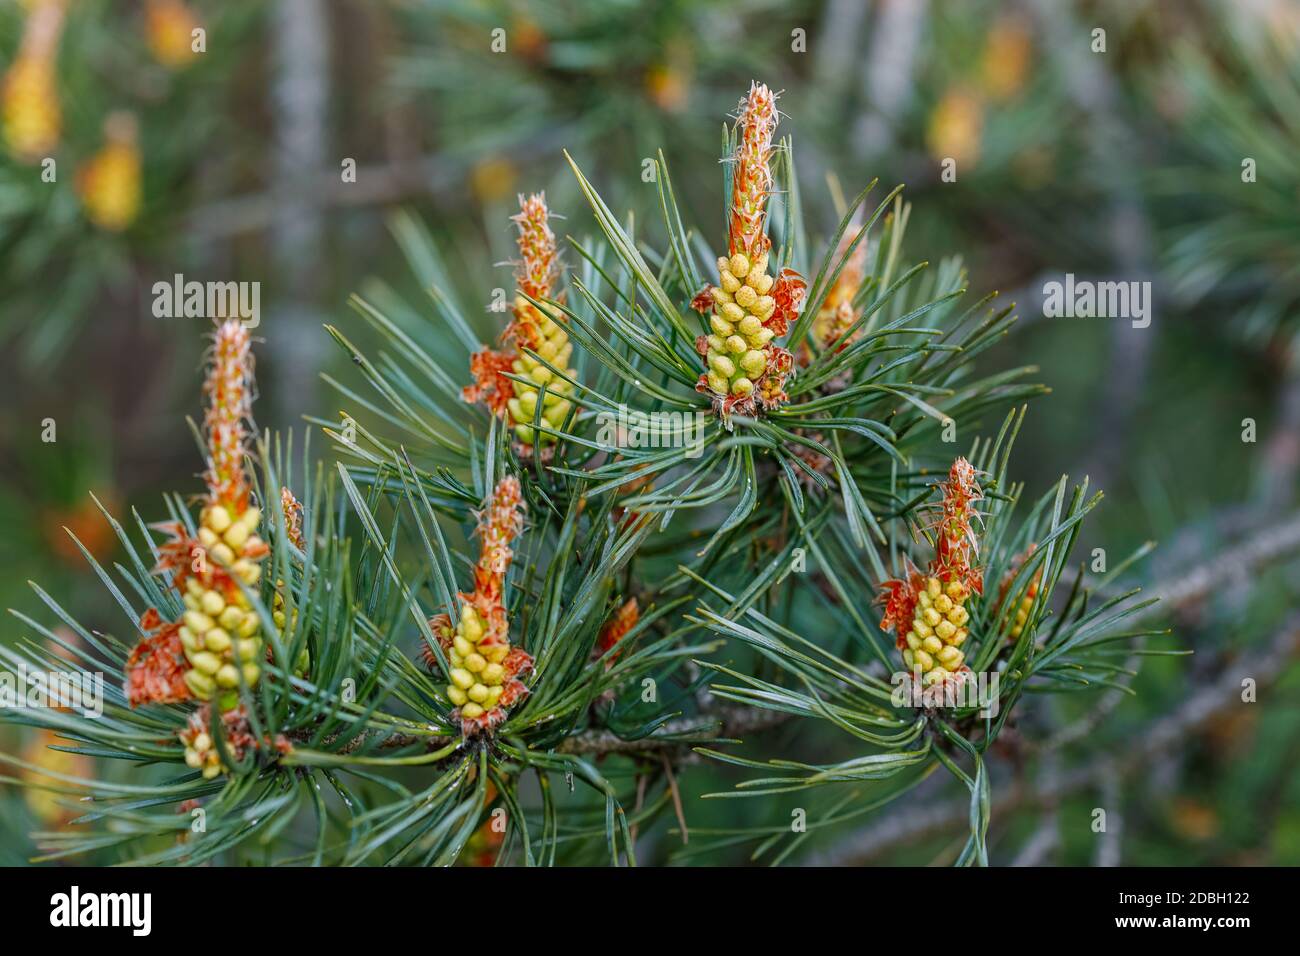 Blooming pine tree closeup with focus in the foreground. How the pine blossoms. Flowering coniferous trees. Stock Photo